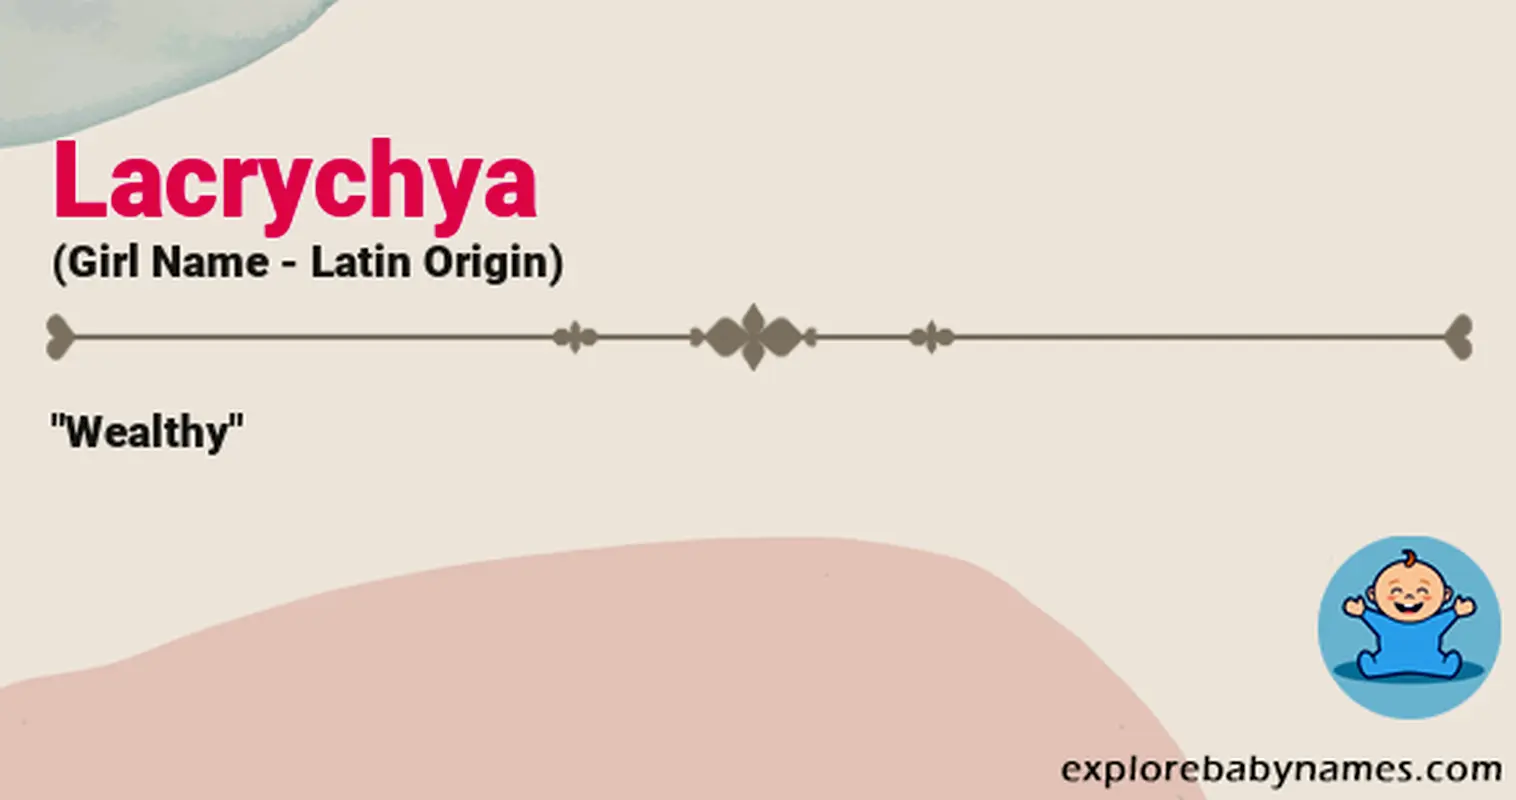 Meaning of Lacrychya